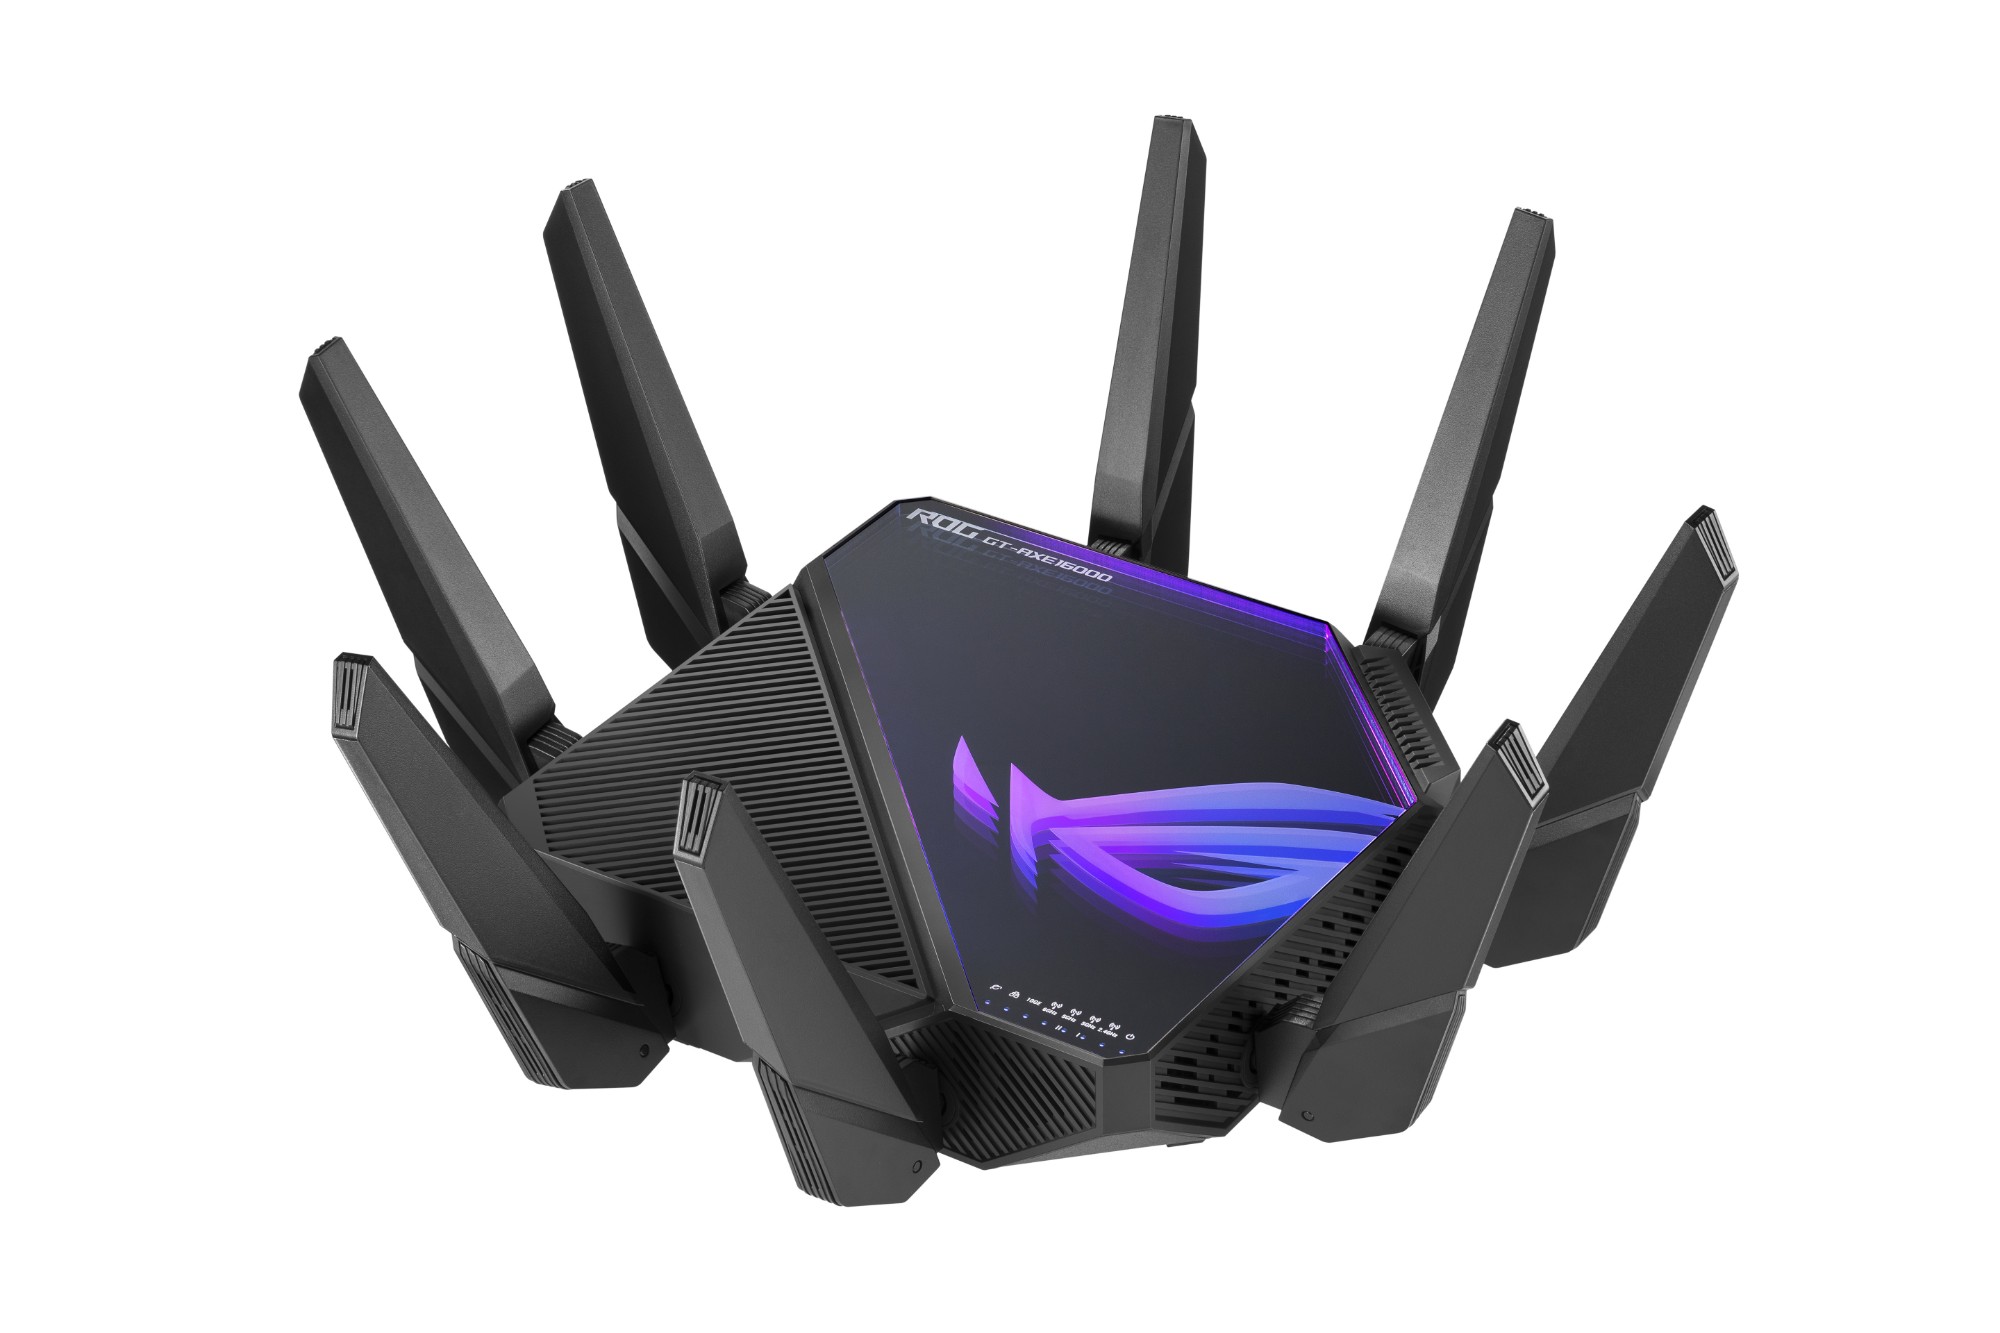 90IG06W0-MU2A10 ASUS ROG Rapture GT-AXE16000 - Wireless router - 6-port switch - 10 GigE, 2.5 GigE - WAN ports: 3 - Wi-Fi 6E - Multi-Band